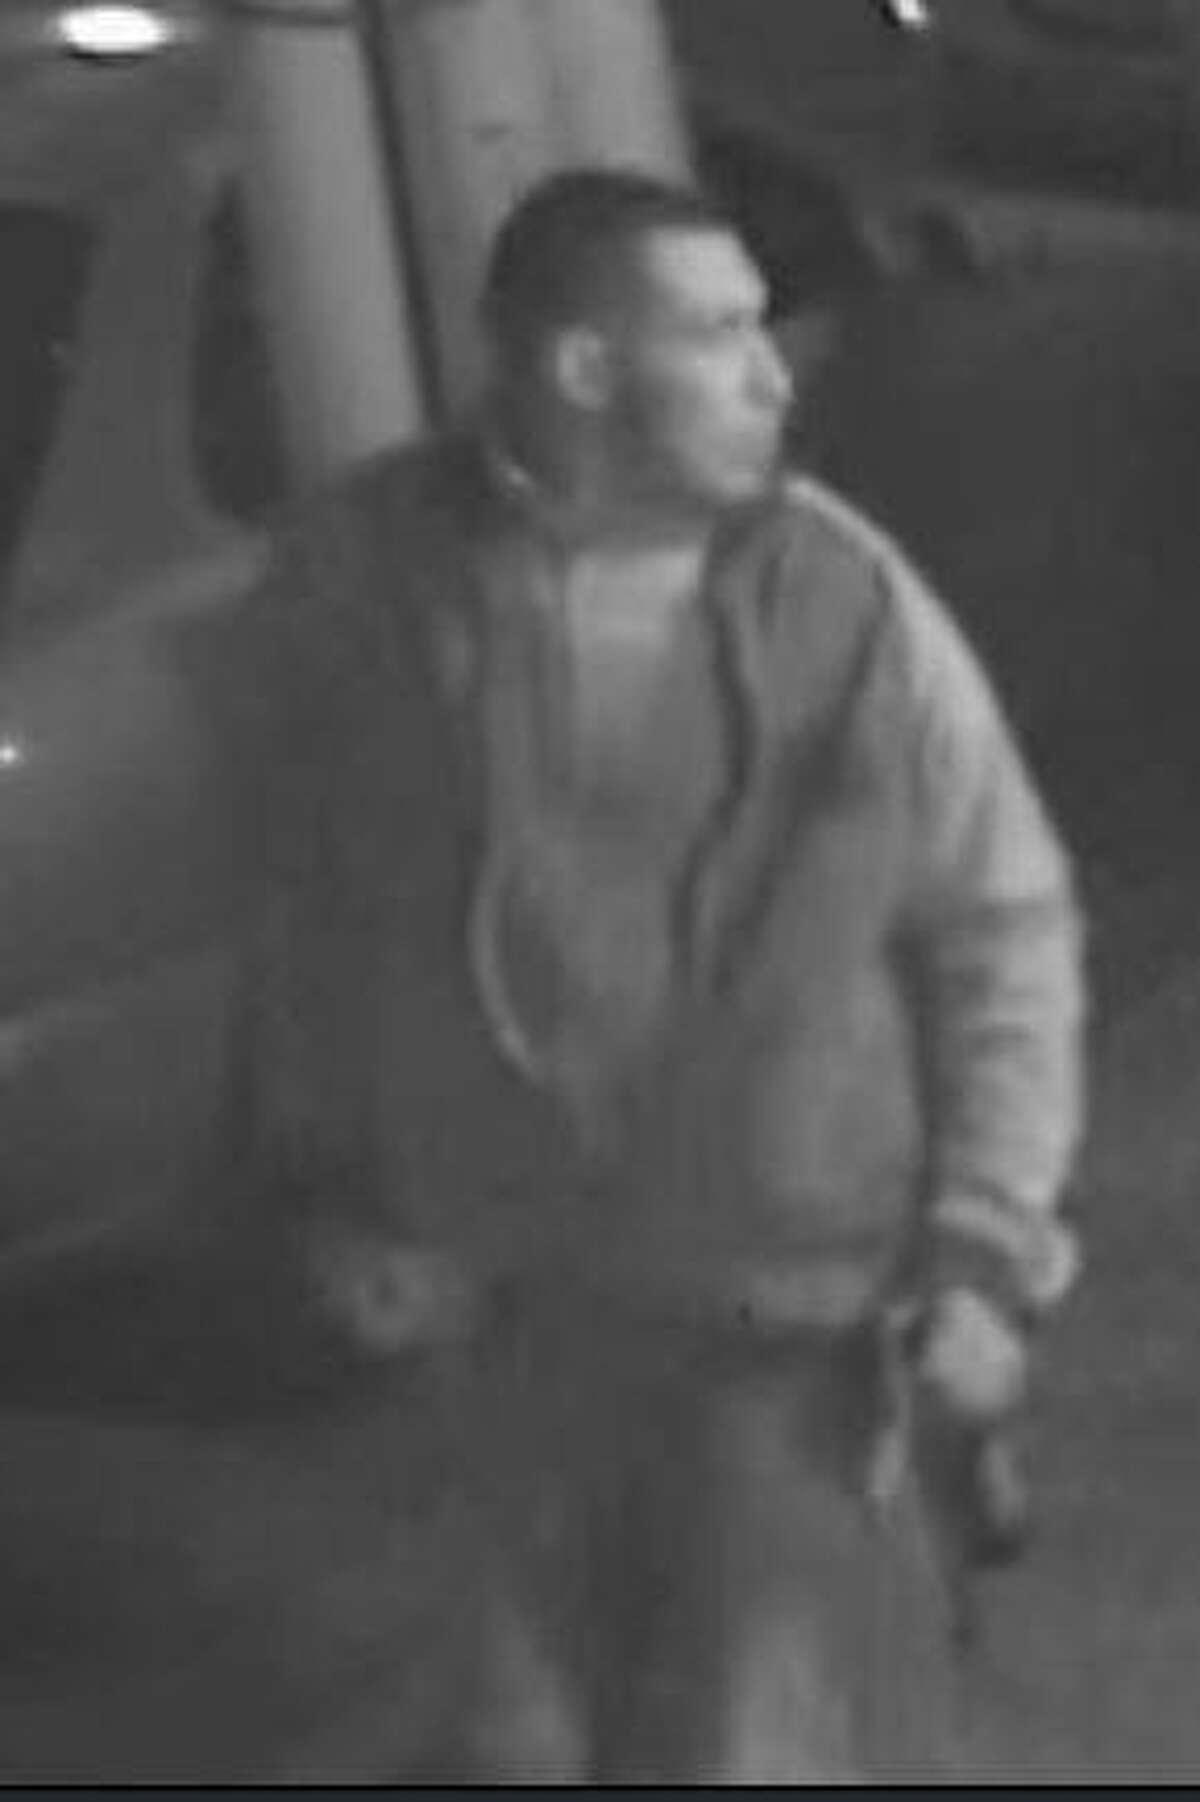 One of two men who police are trying to identify as being involved in a stabbing that left a man dead in Stamford on Sunday night. Anyone with information on who they are is asked to call 203 977-4417.